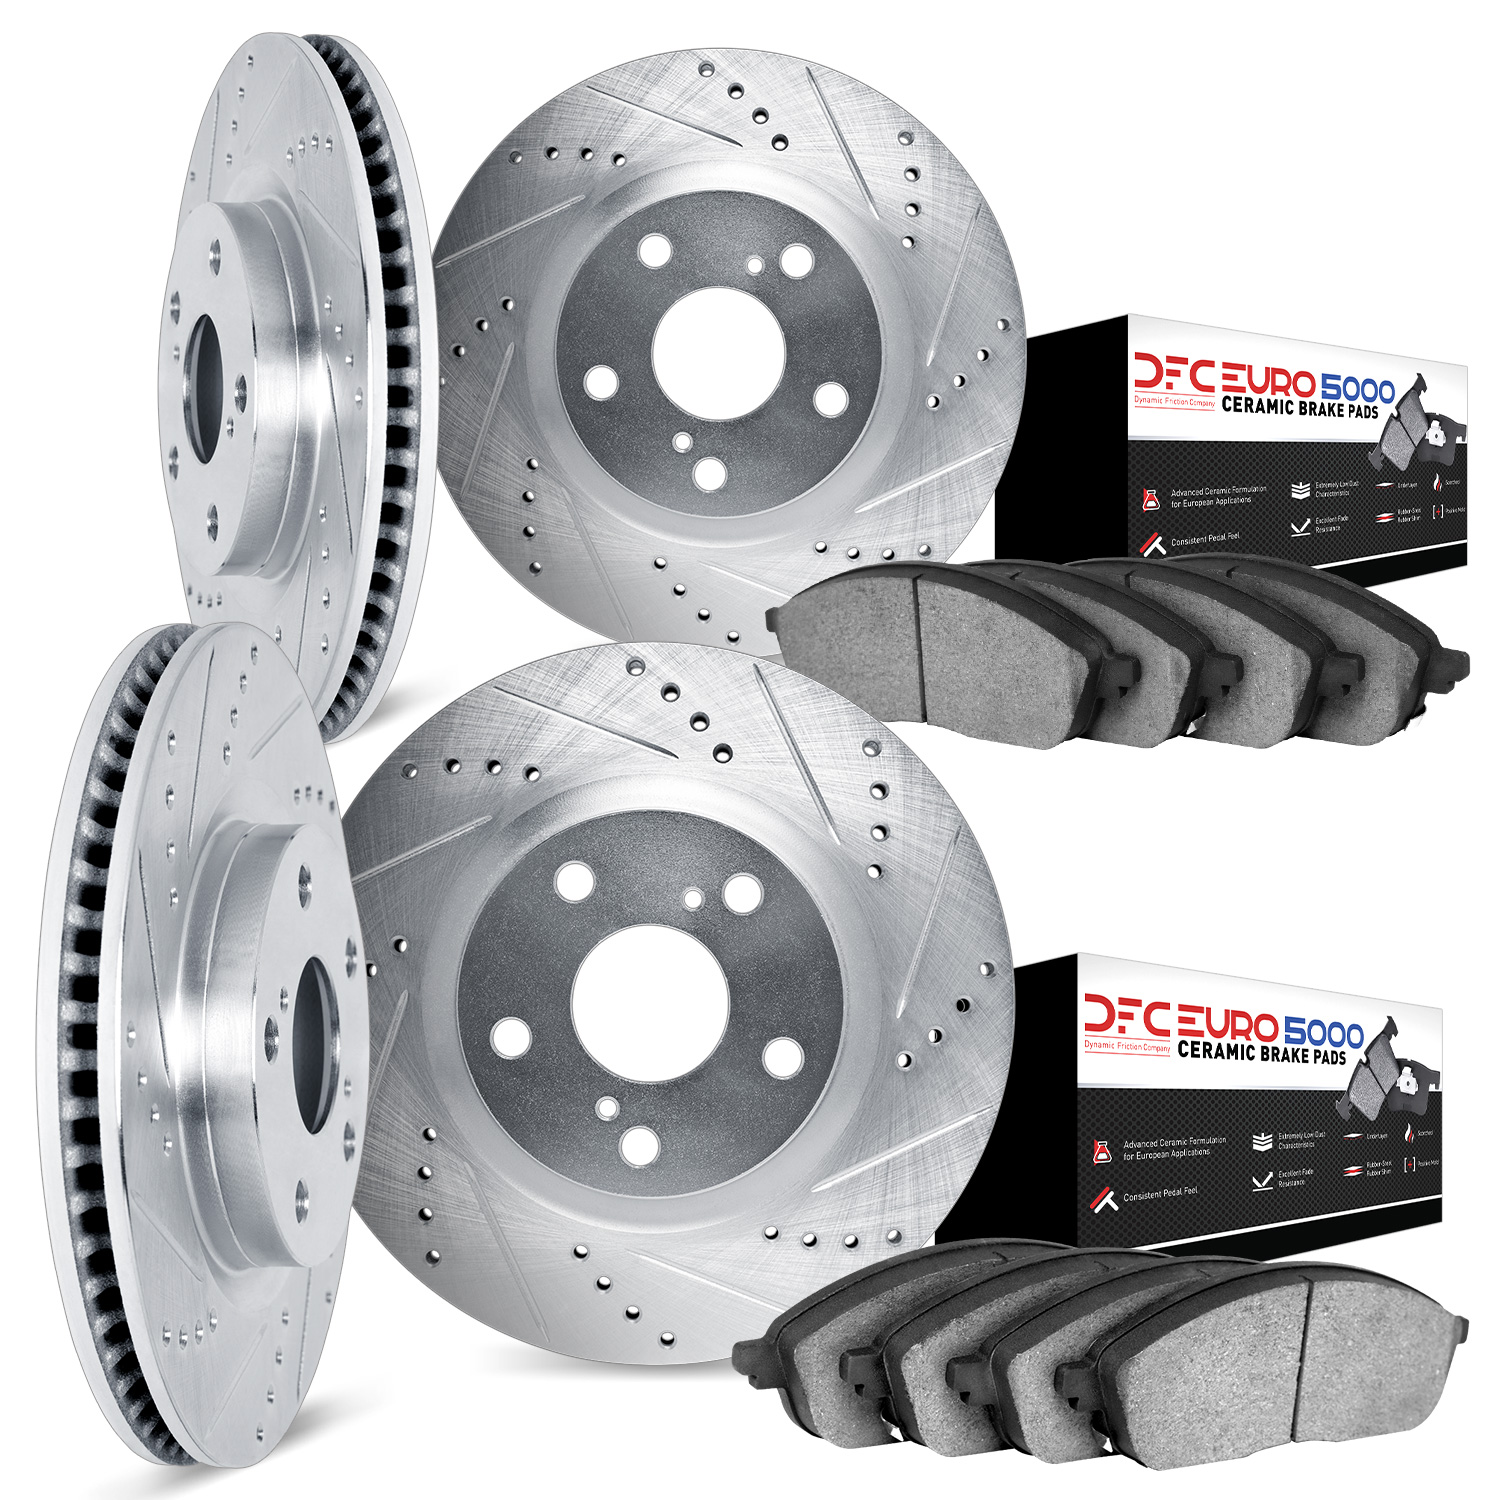 7604-31024 Drilled/Slotted Brake Rotors w/5000 Euro Ceramic Brake Pads Kit [Silver], 2012-2021 BMW, Position: Front and Rear